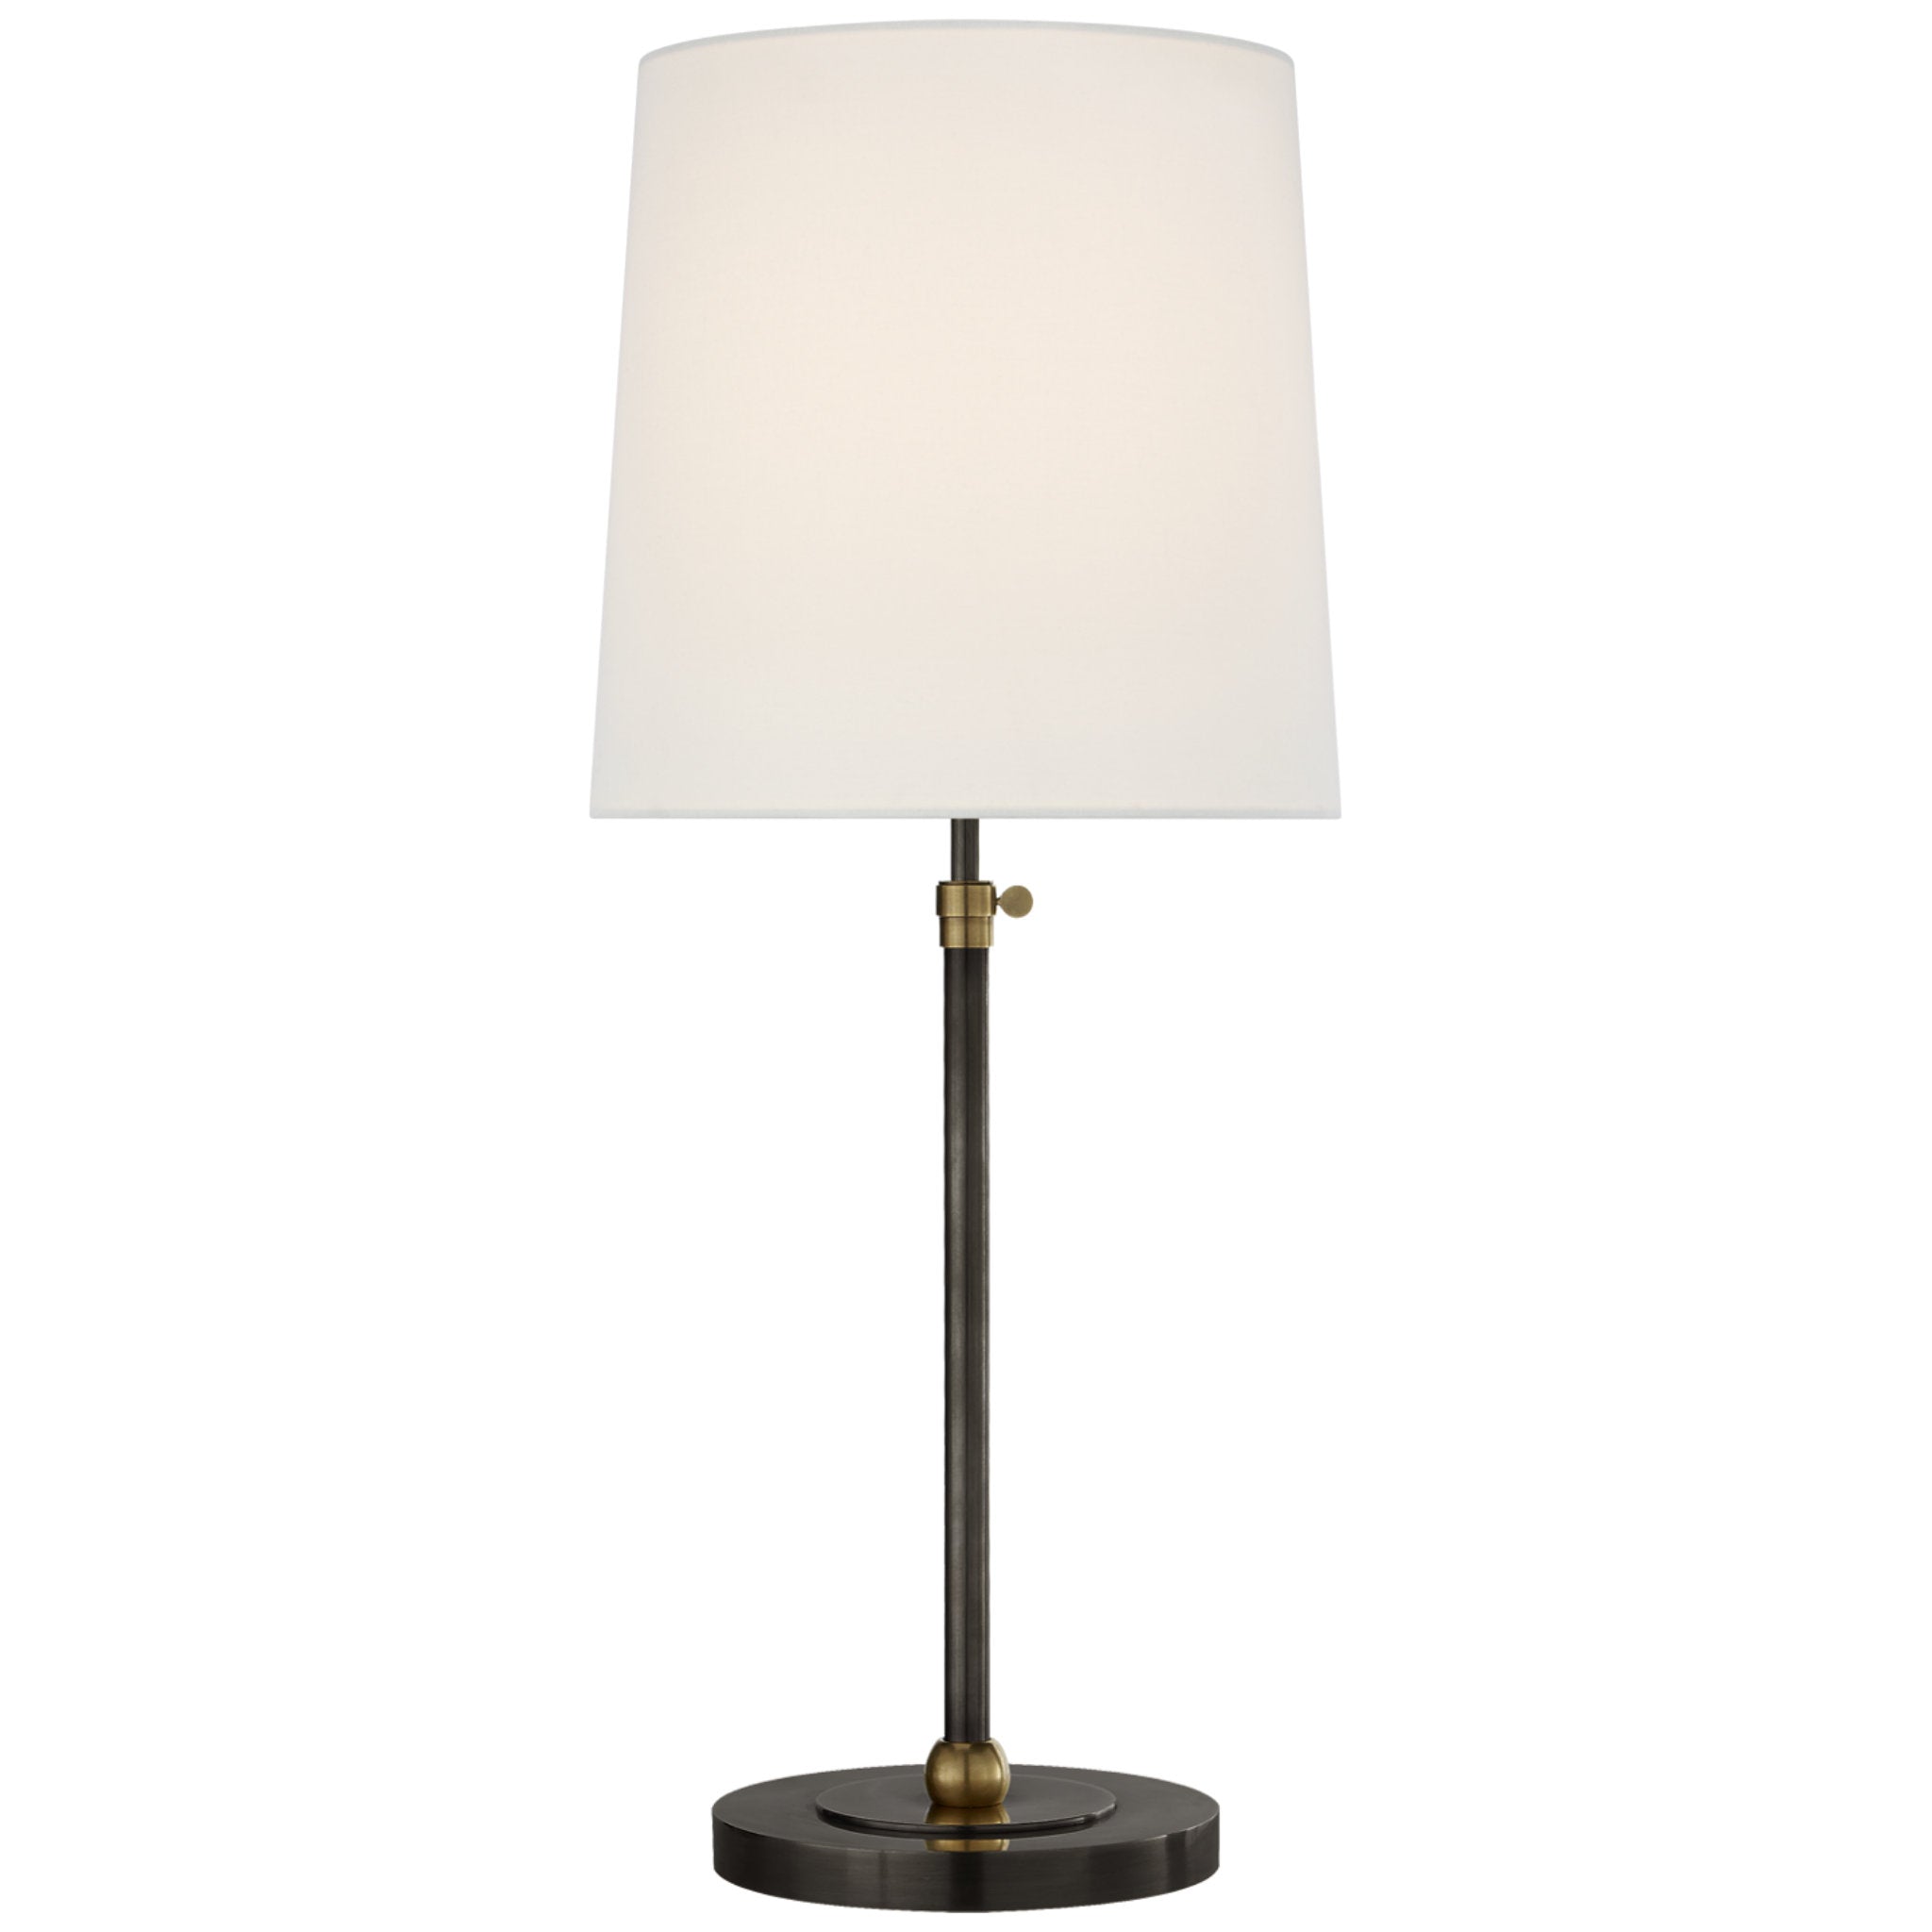 Thomas O'Brien Bryant Large Table Lamp in Bronze and Hand-Rubbed Antique Brass with Linen Shade